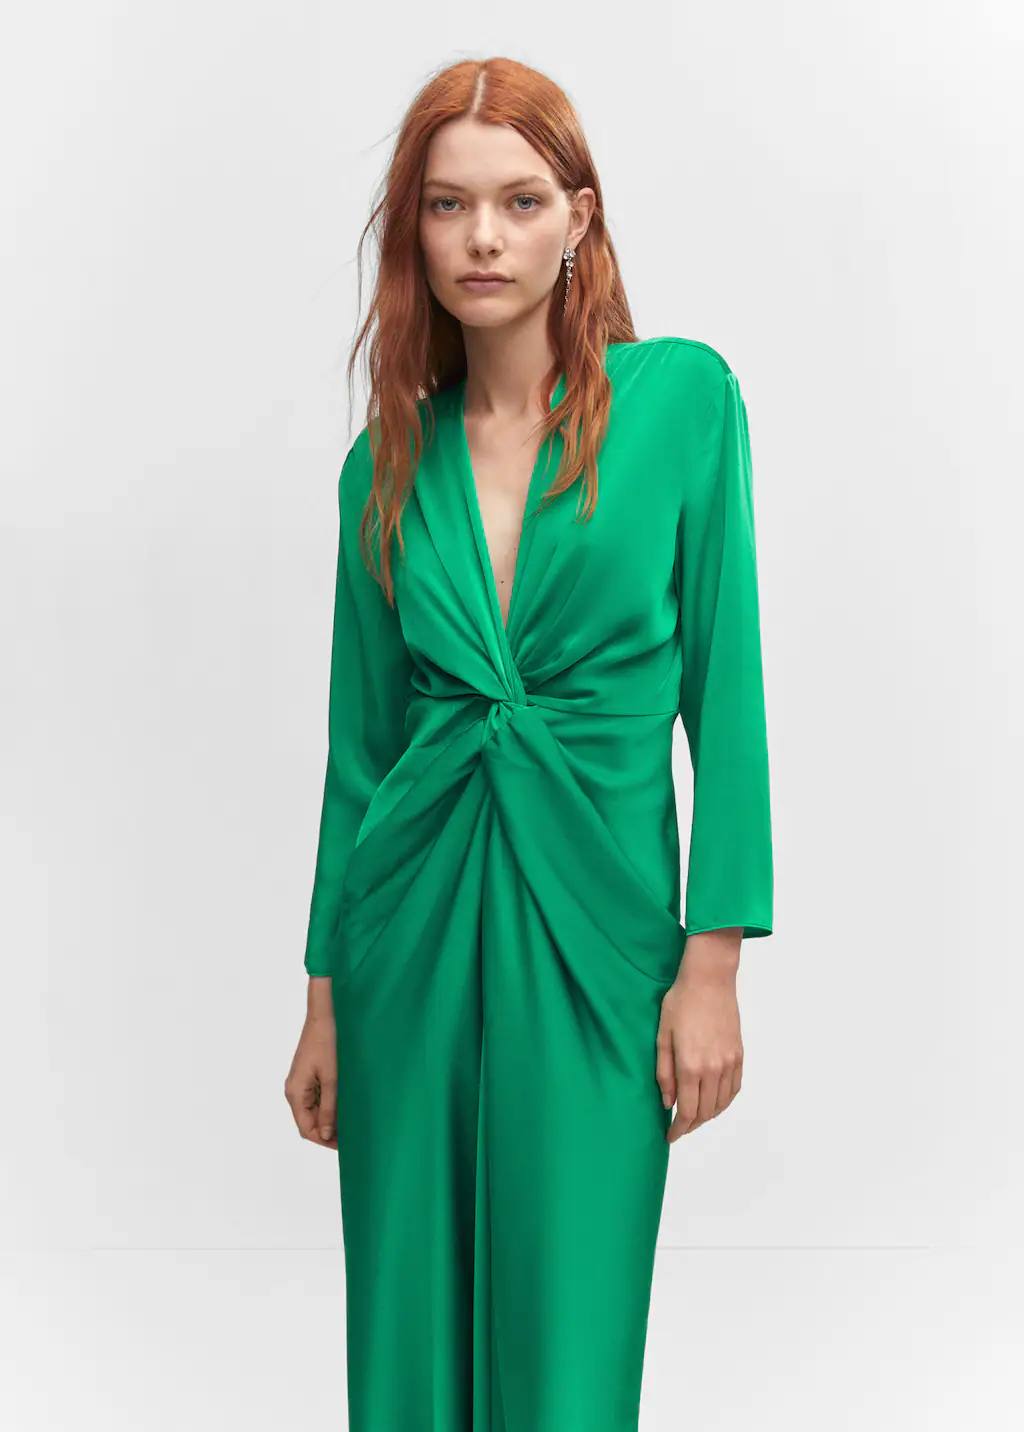 Tap into the autumn winter 2023 fashion trends with Mango's green satin dress with knot detail. Satin Recycled polyester blend fabric in a Straight maxi design with Long sleeves, Zip fastening on the back section.